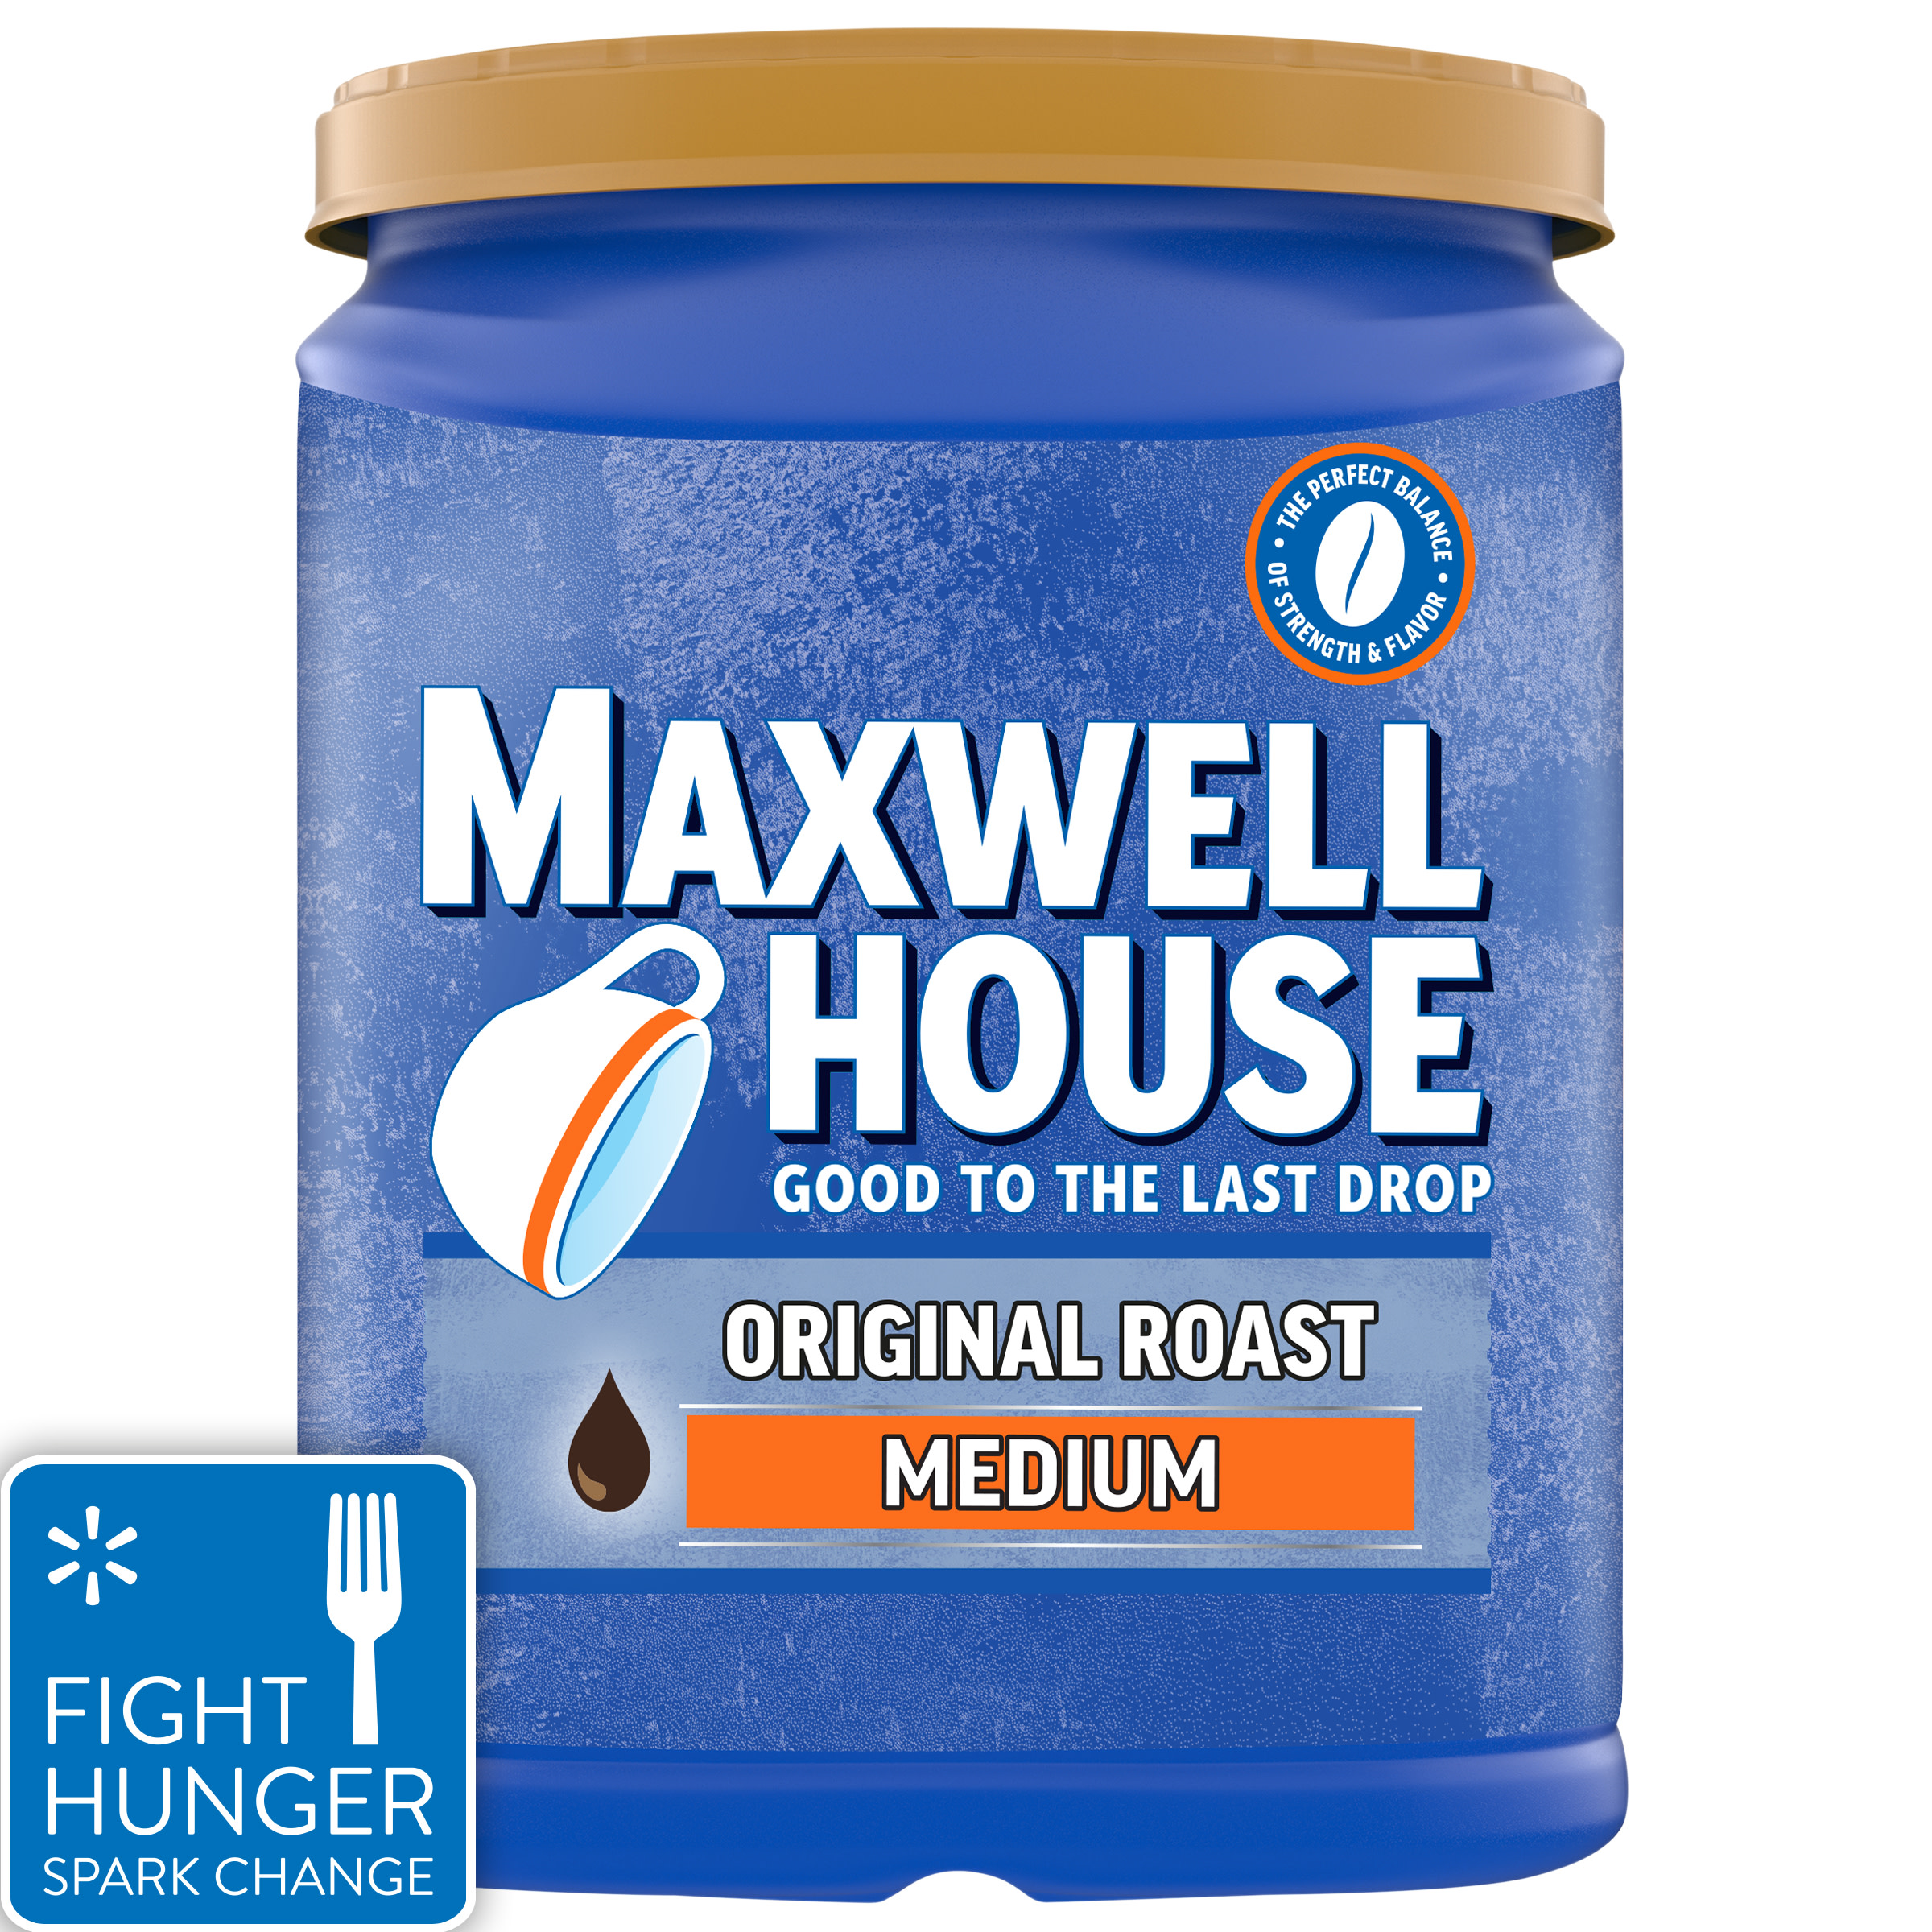 Maxwell House Original Roast Ground Coffee, 42.5 oz. Canister - image 1 of 15